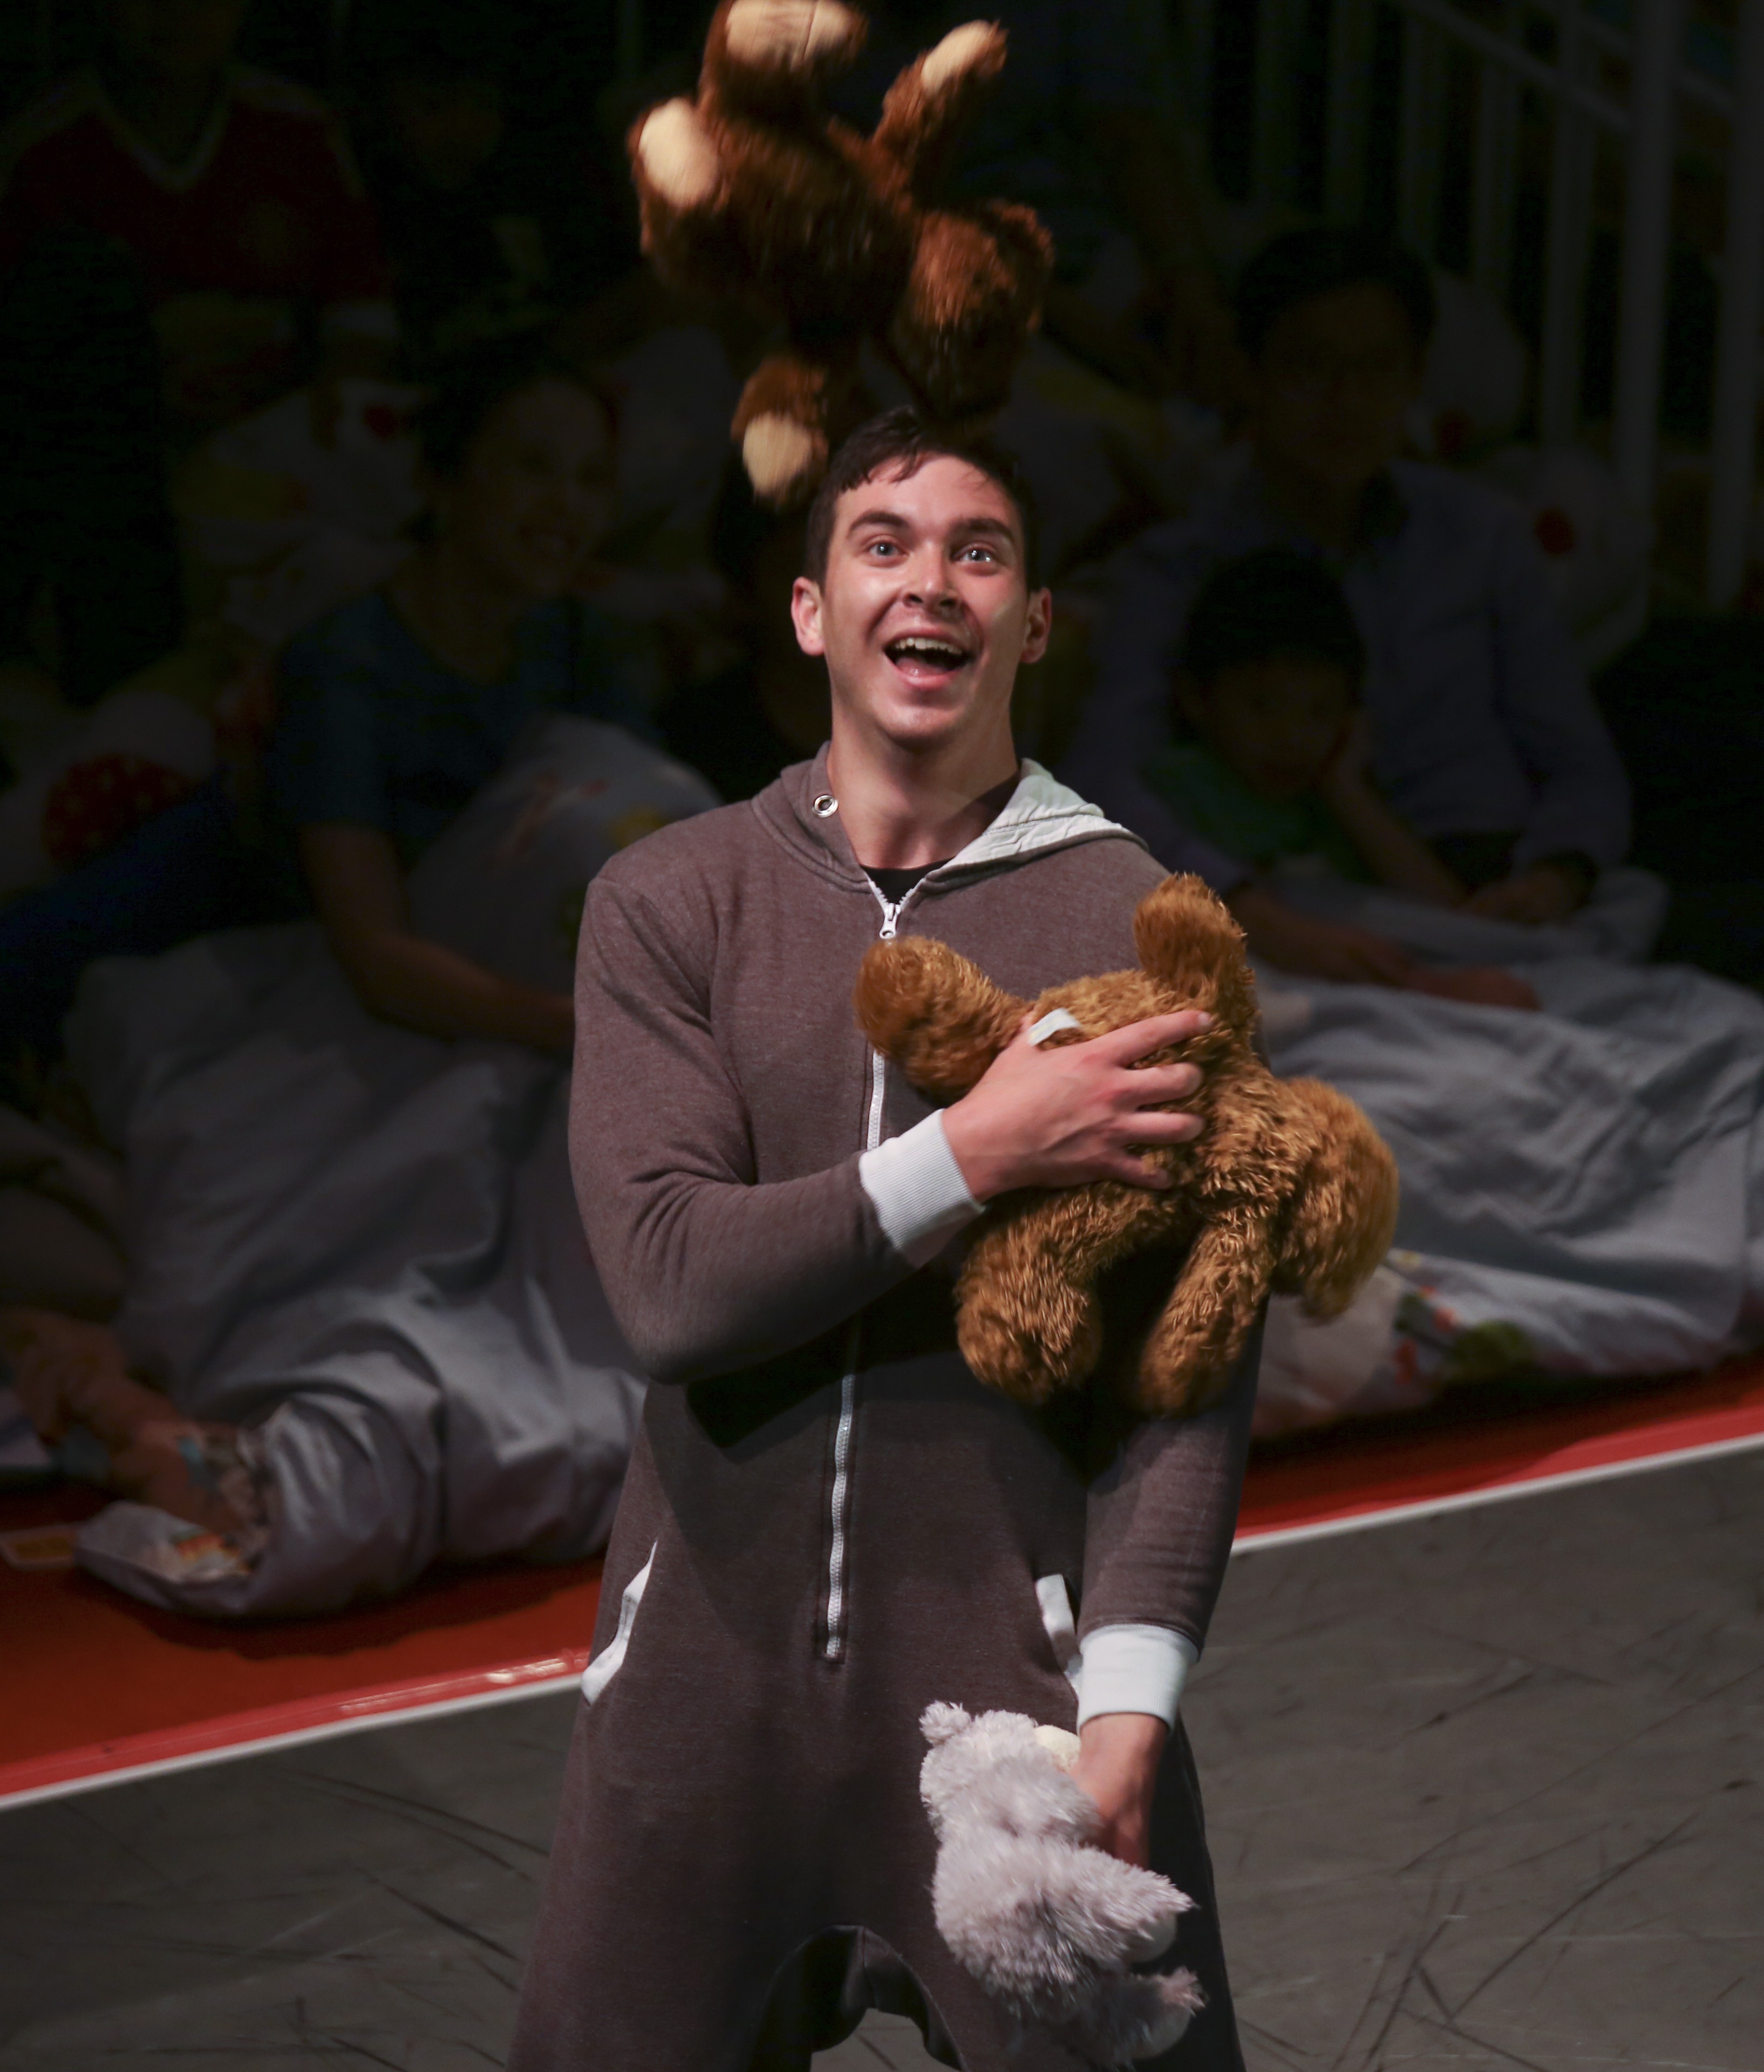 Bedtime Stories blends theatre, circus and literature in a show that asks questions about parent-child relations in modern families